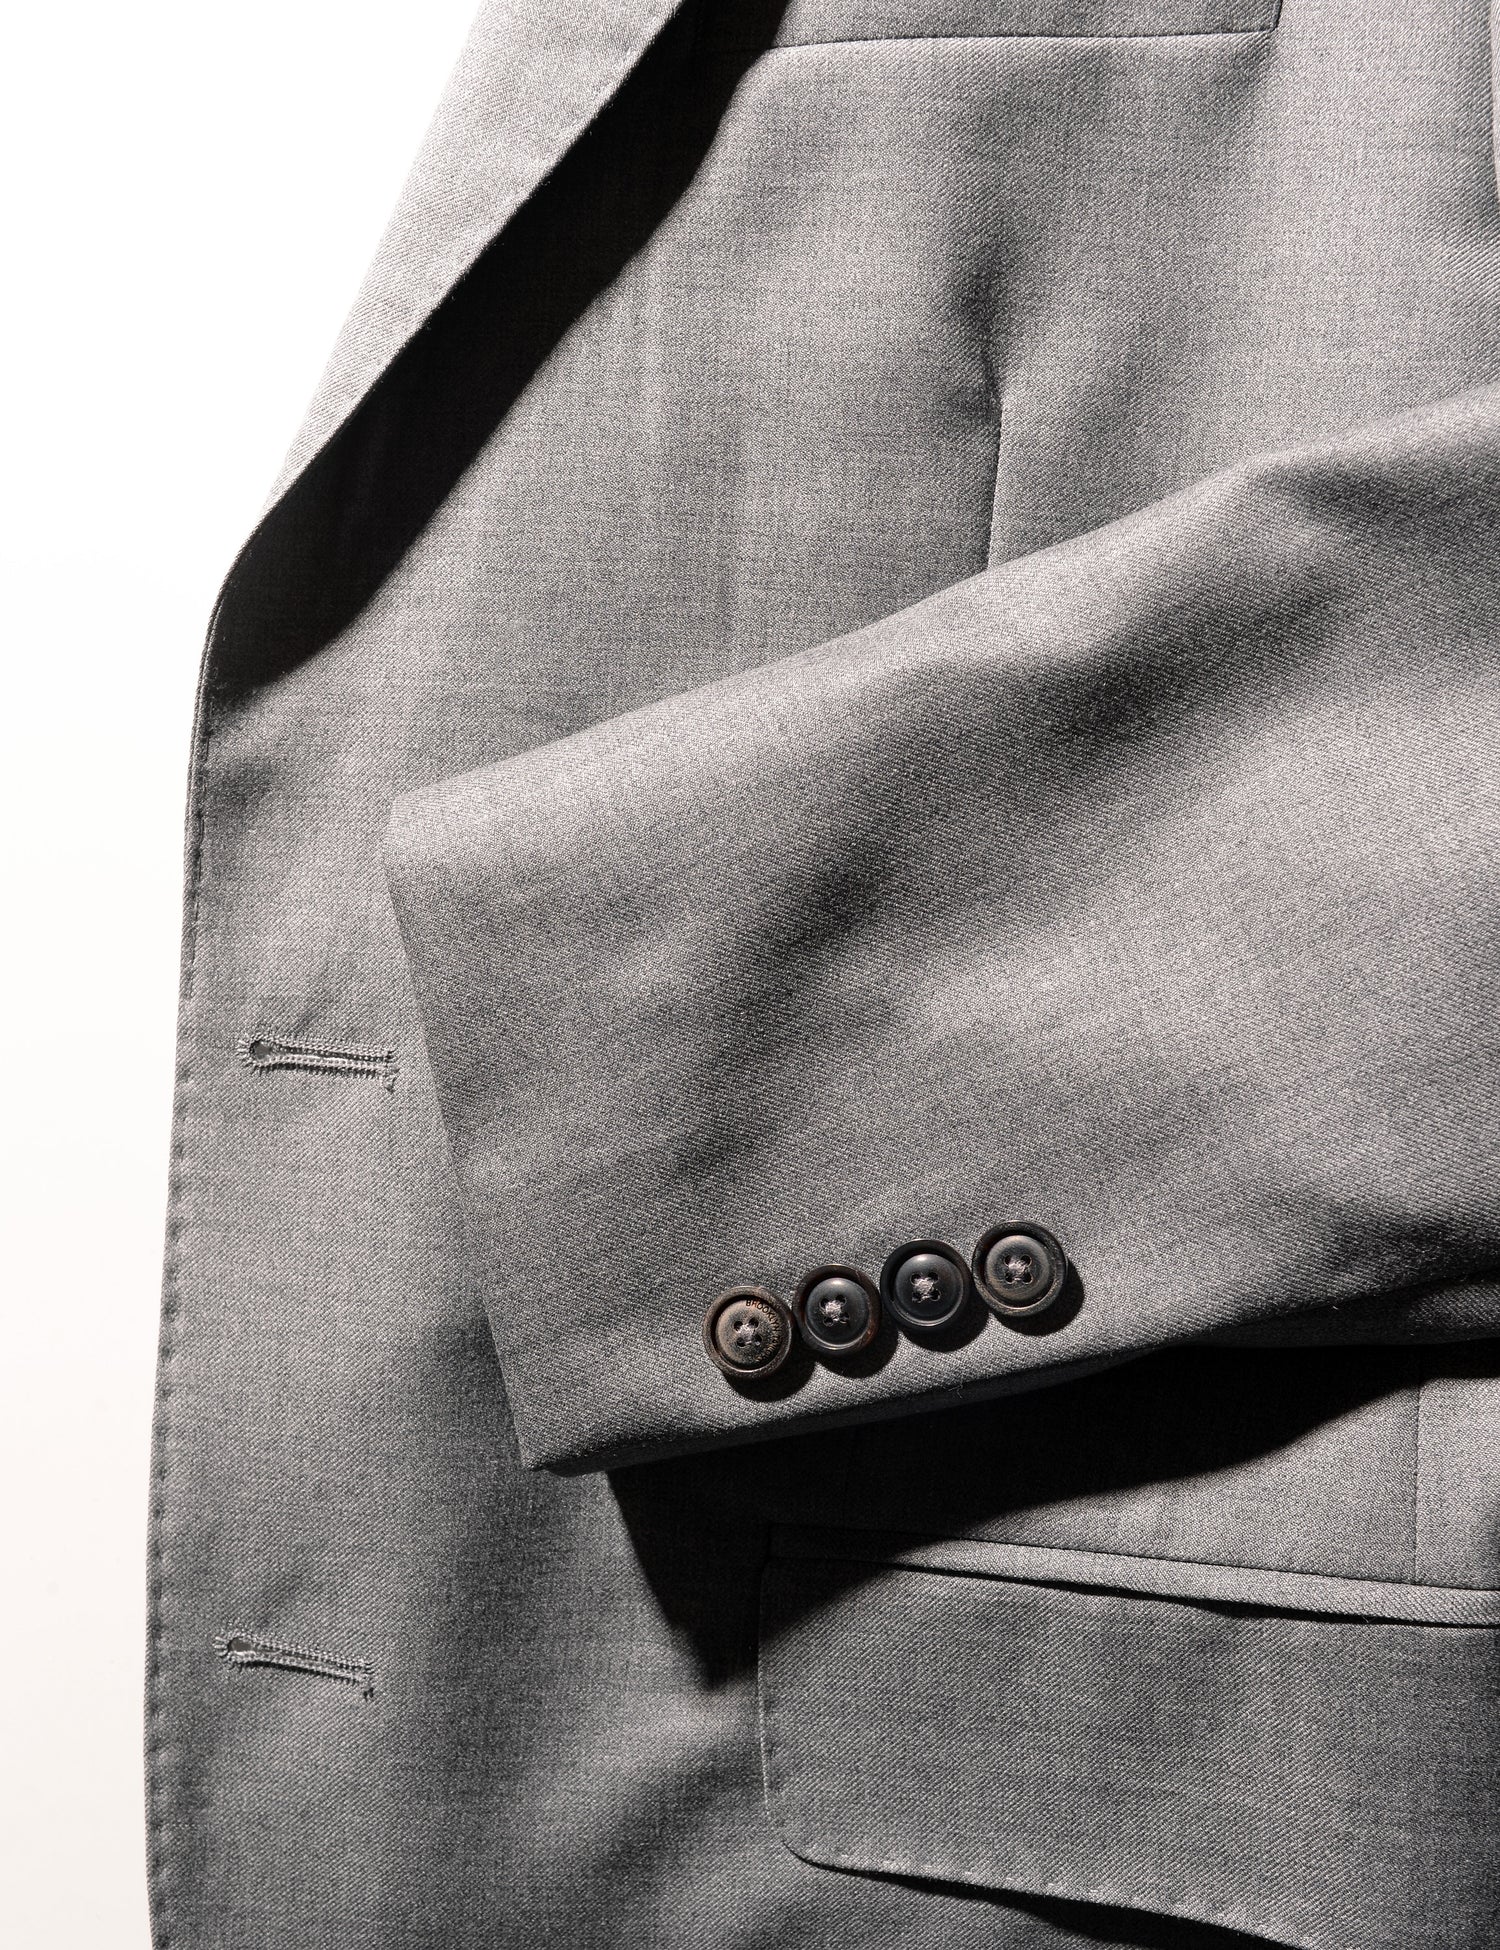 Detail shot of Brooklyn Tailors BKT50 Tailored Jacket in Super 110s Twill - Dove Gray showing lapel and cuff